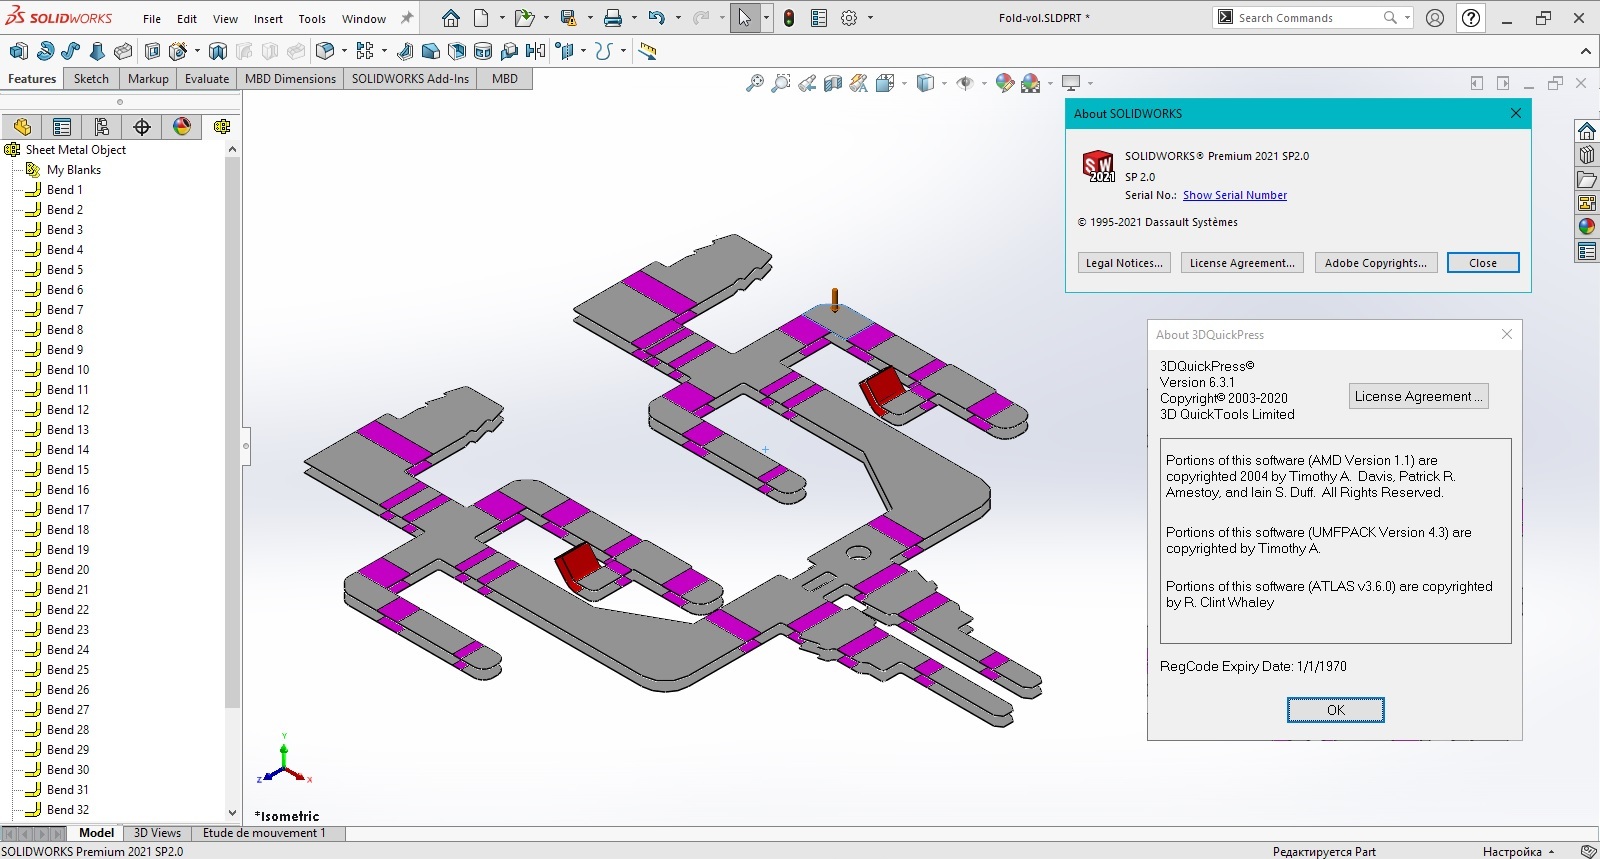 Working with 3DQuickPress v6.3.1 for SolidWorks 2012-2021 full